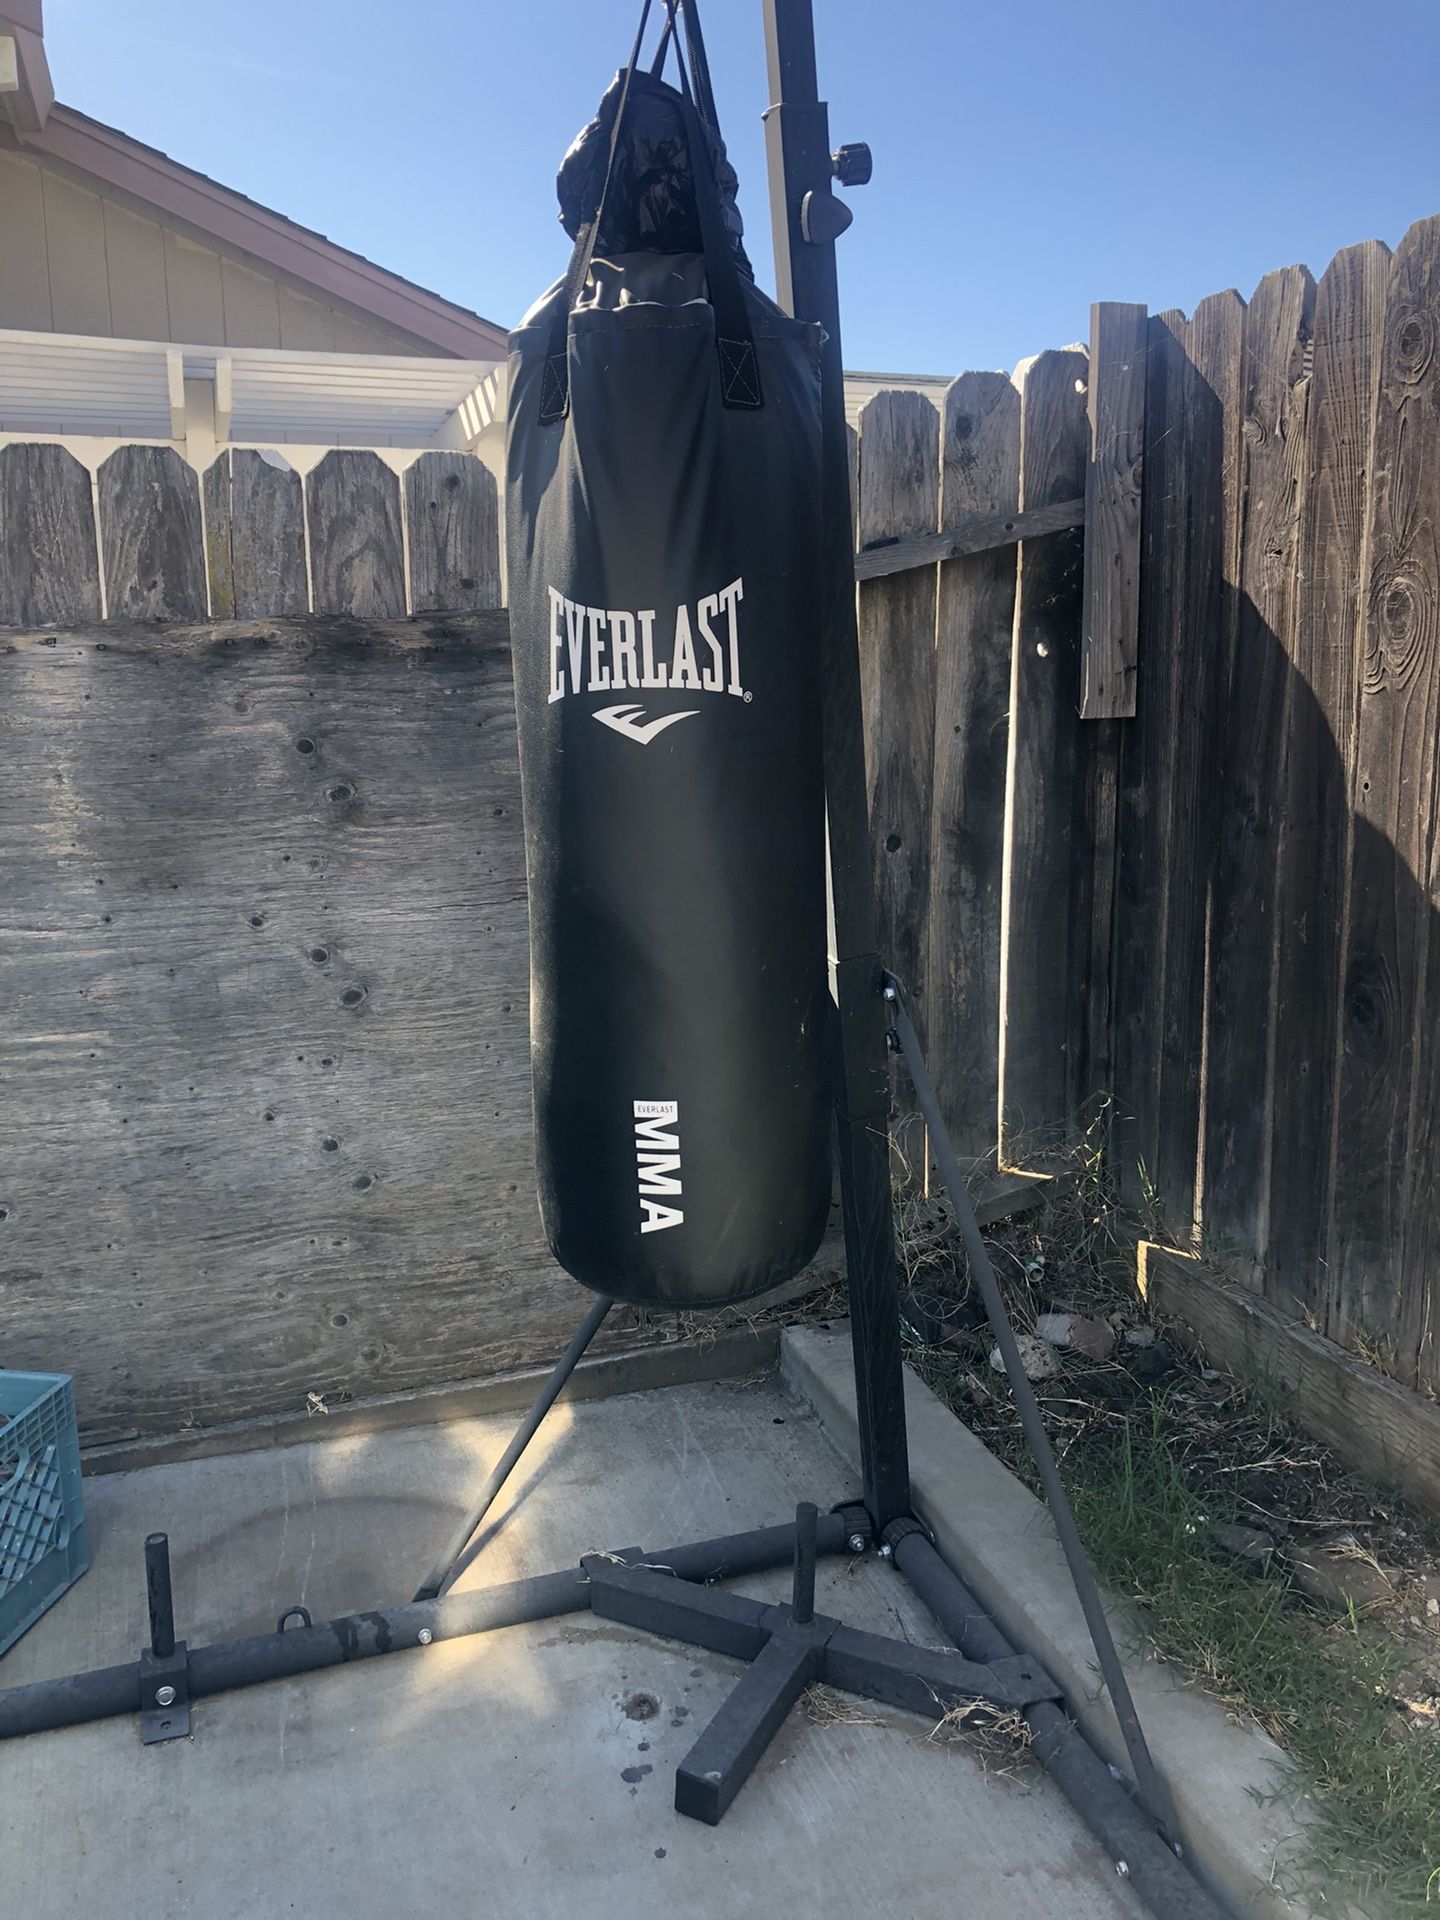 Punching bag with stand